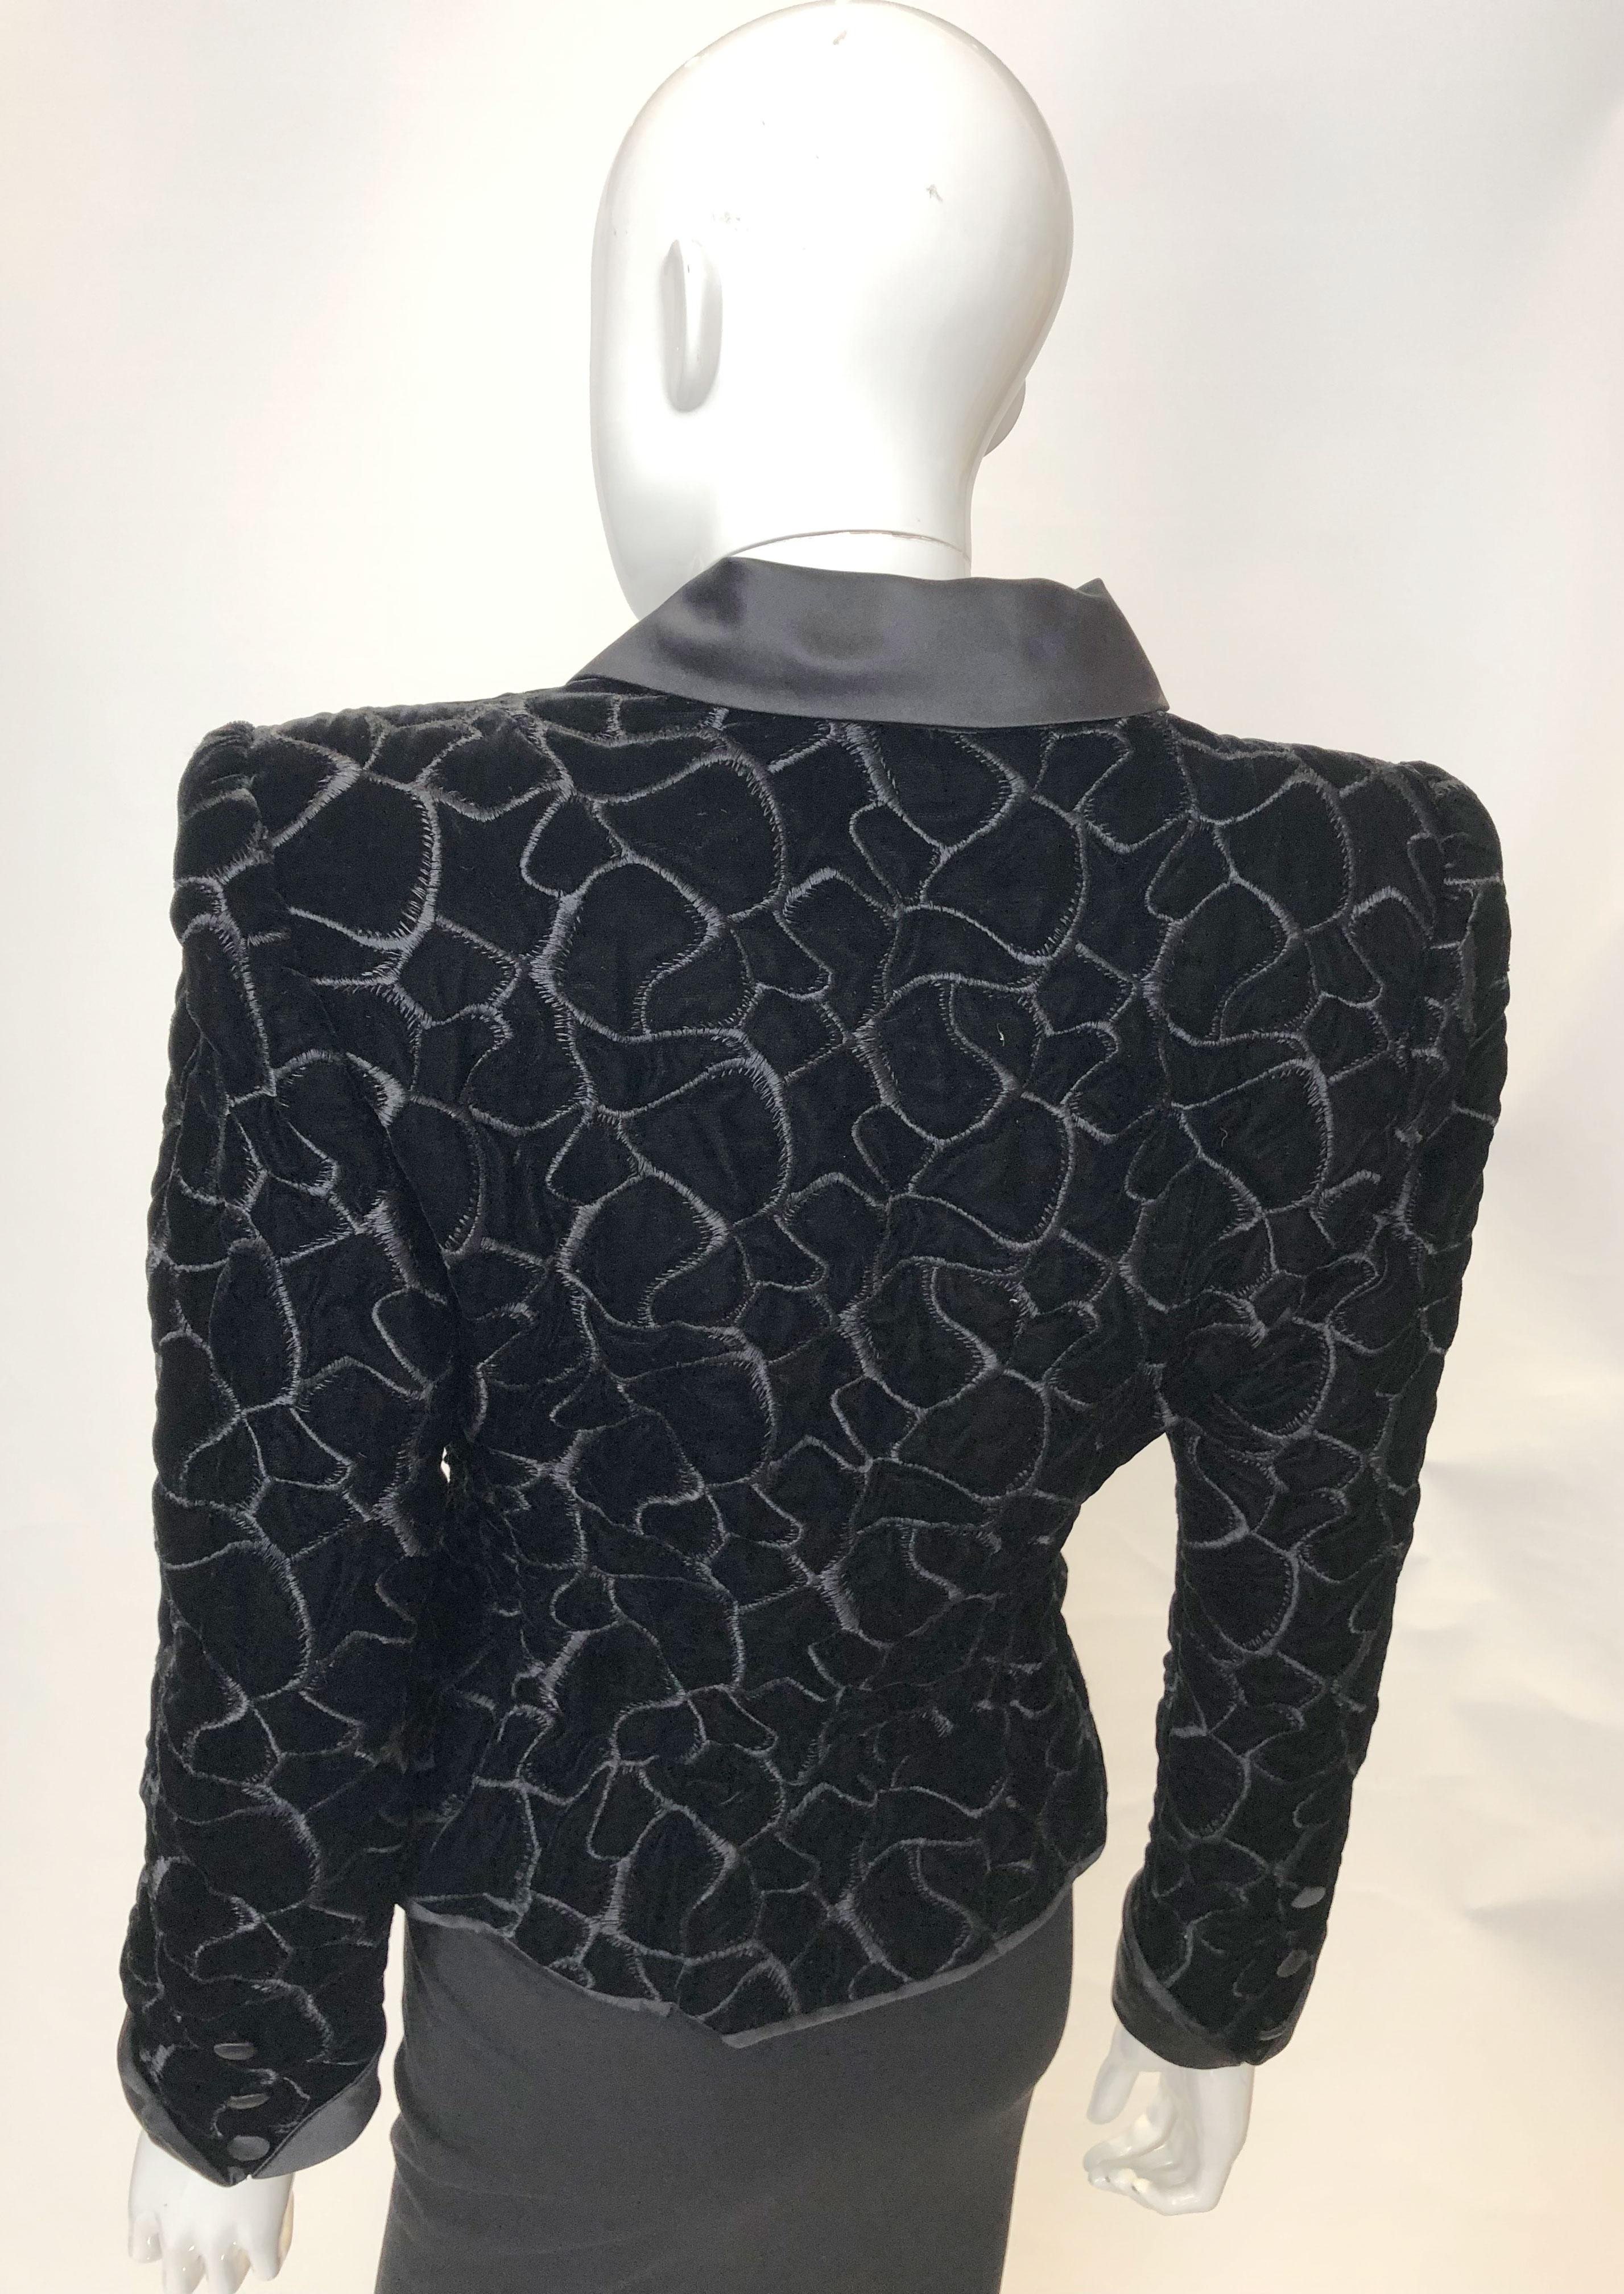 A head turning jacket by Monteverdi Couture. The jacket is in black velvet with interesting stitch detail. It has a satin collar and covered buttons. It is fully lined and has a peplum detail at the waist.